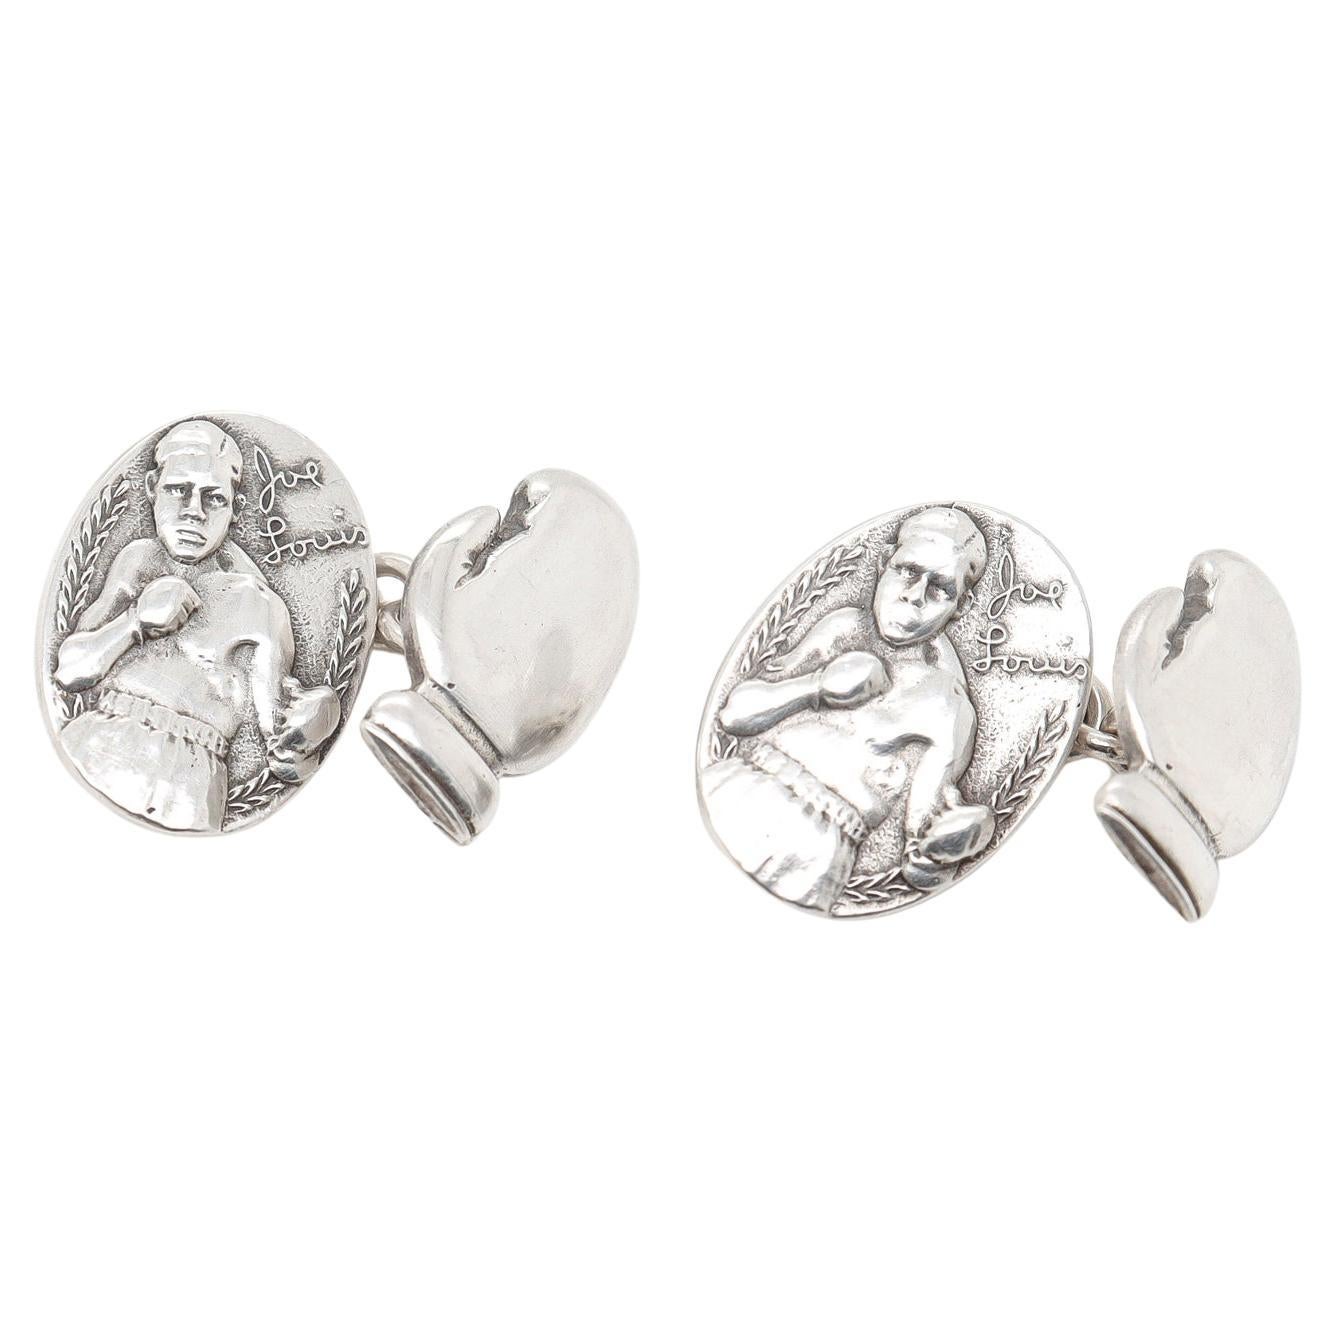 Pair of Sterling Silver Champion Boxer Joe Lewis & Boxing Gloves Cufflinks